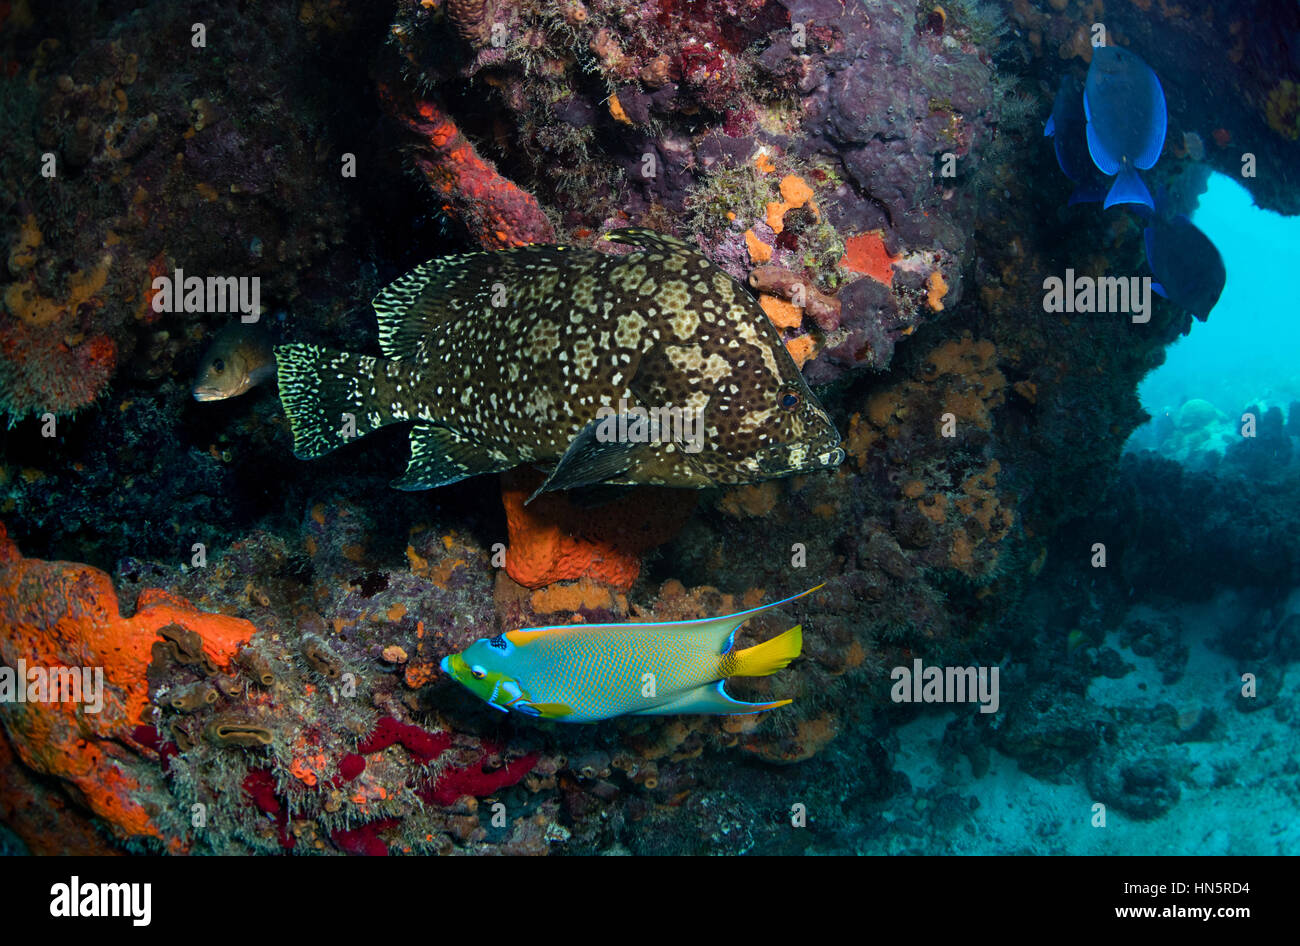 The rarely seen Marbled grouper and Queen angelfish. Stock Photo